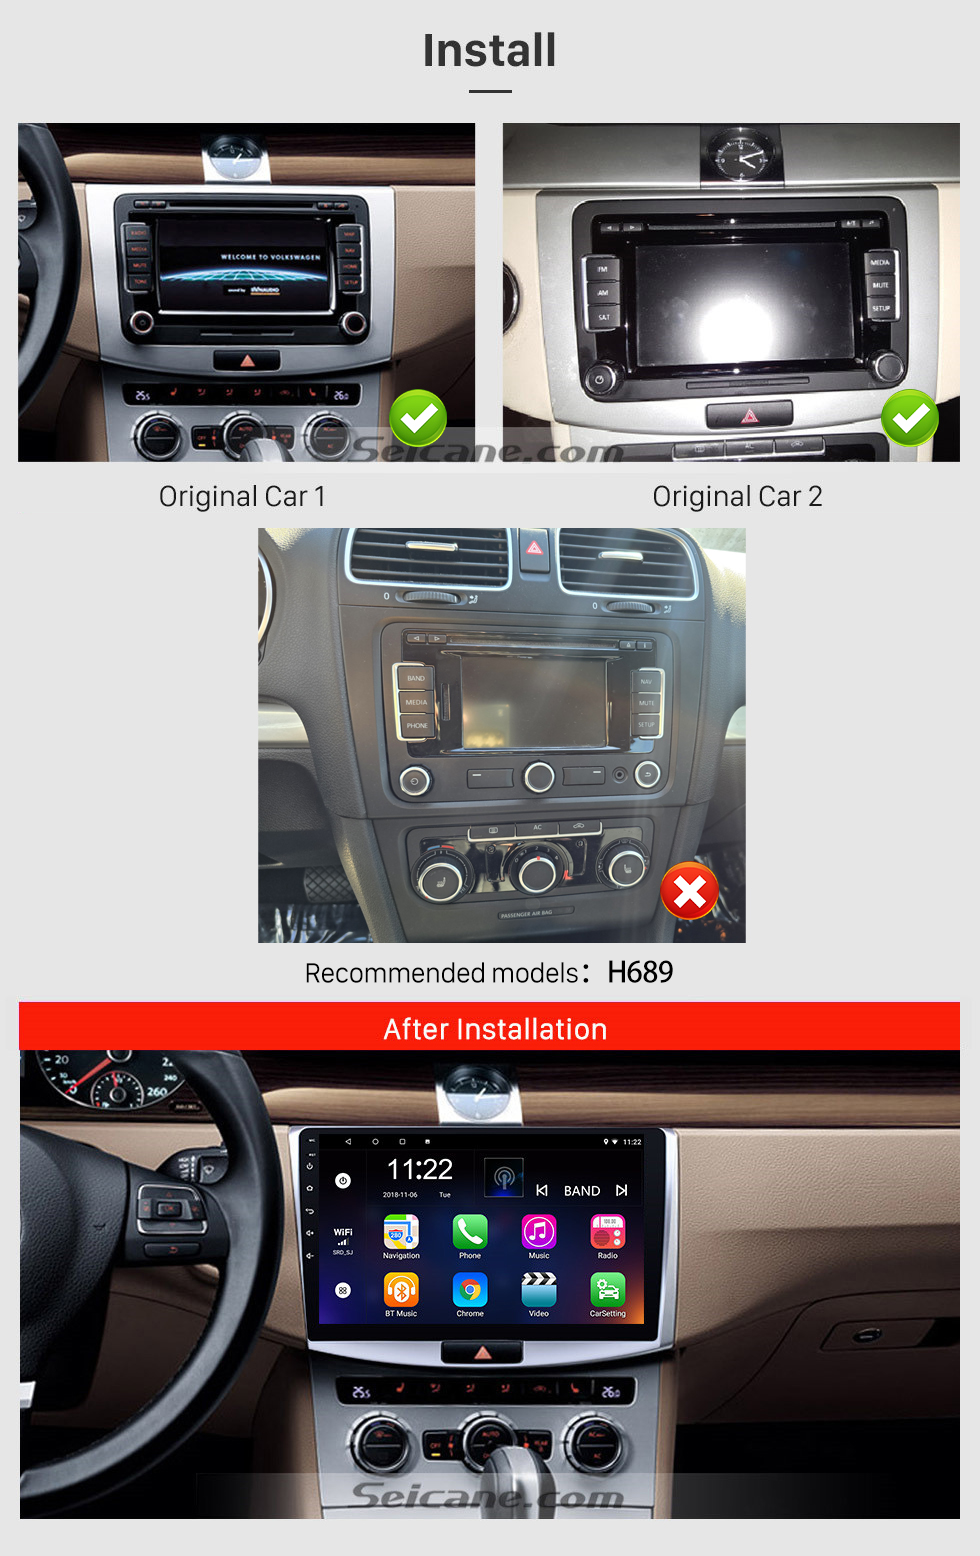 Seicane 2012 2013 2014 VW Volkswagen Magotan B7 Bora Golf 6 10.1 inch Android 13.0 HD Touchscreen GPS Navigation Radio with Bluetooth WIFI support 1080P